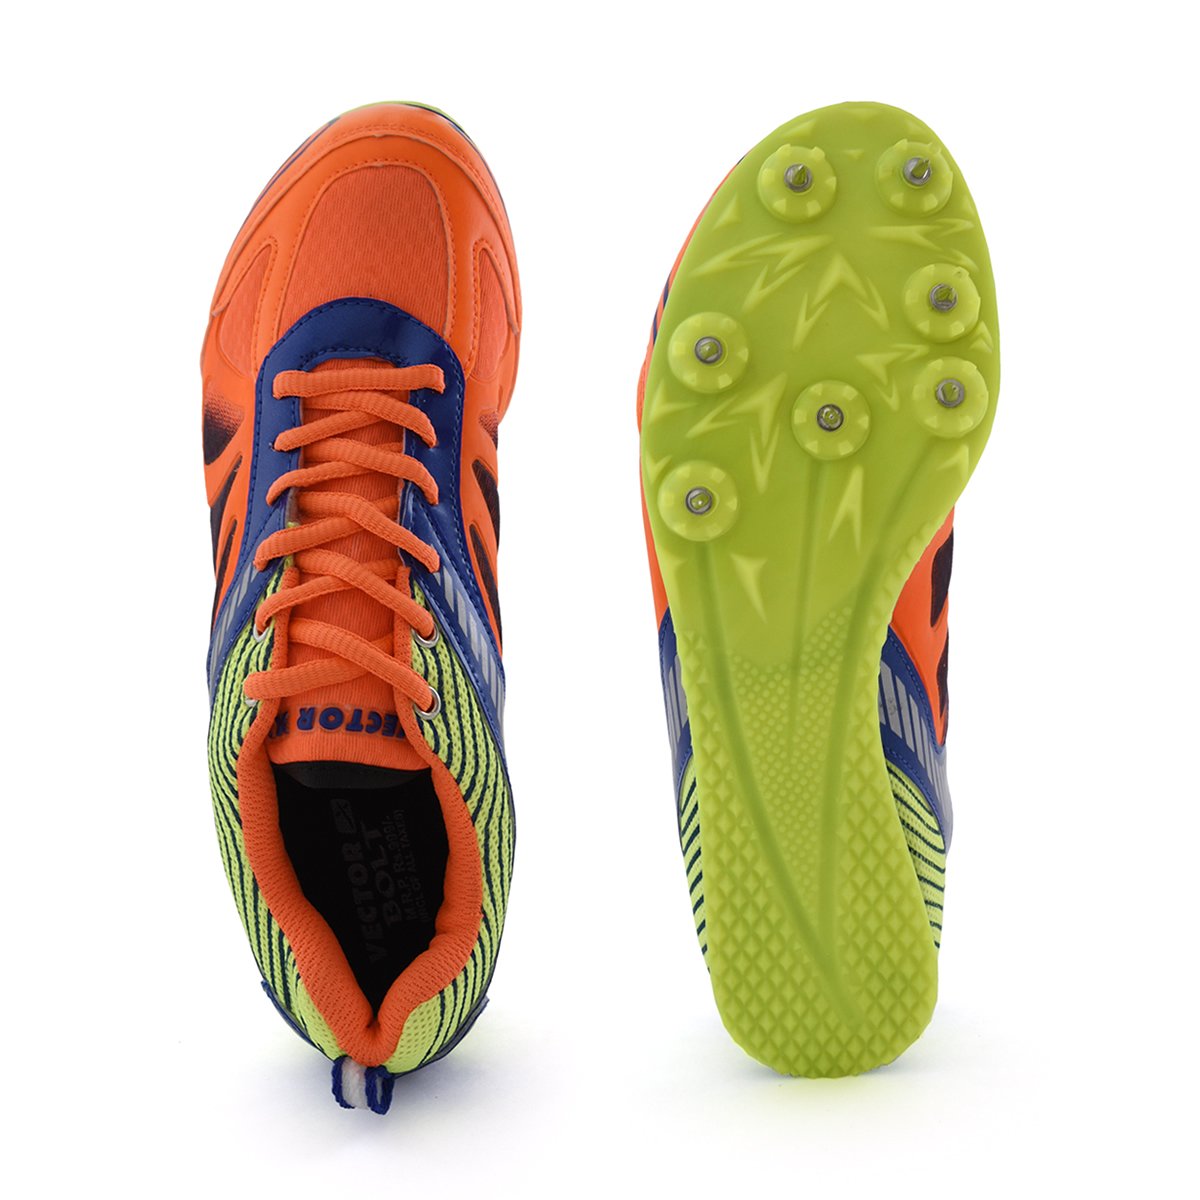 Vector X Bolt Spike Track And Field Shoes - Best Price online Prokicksports.com